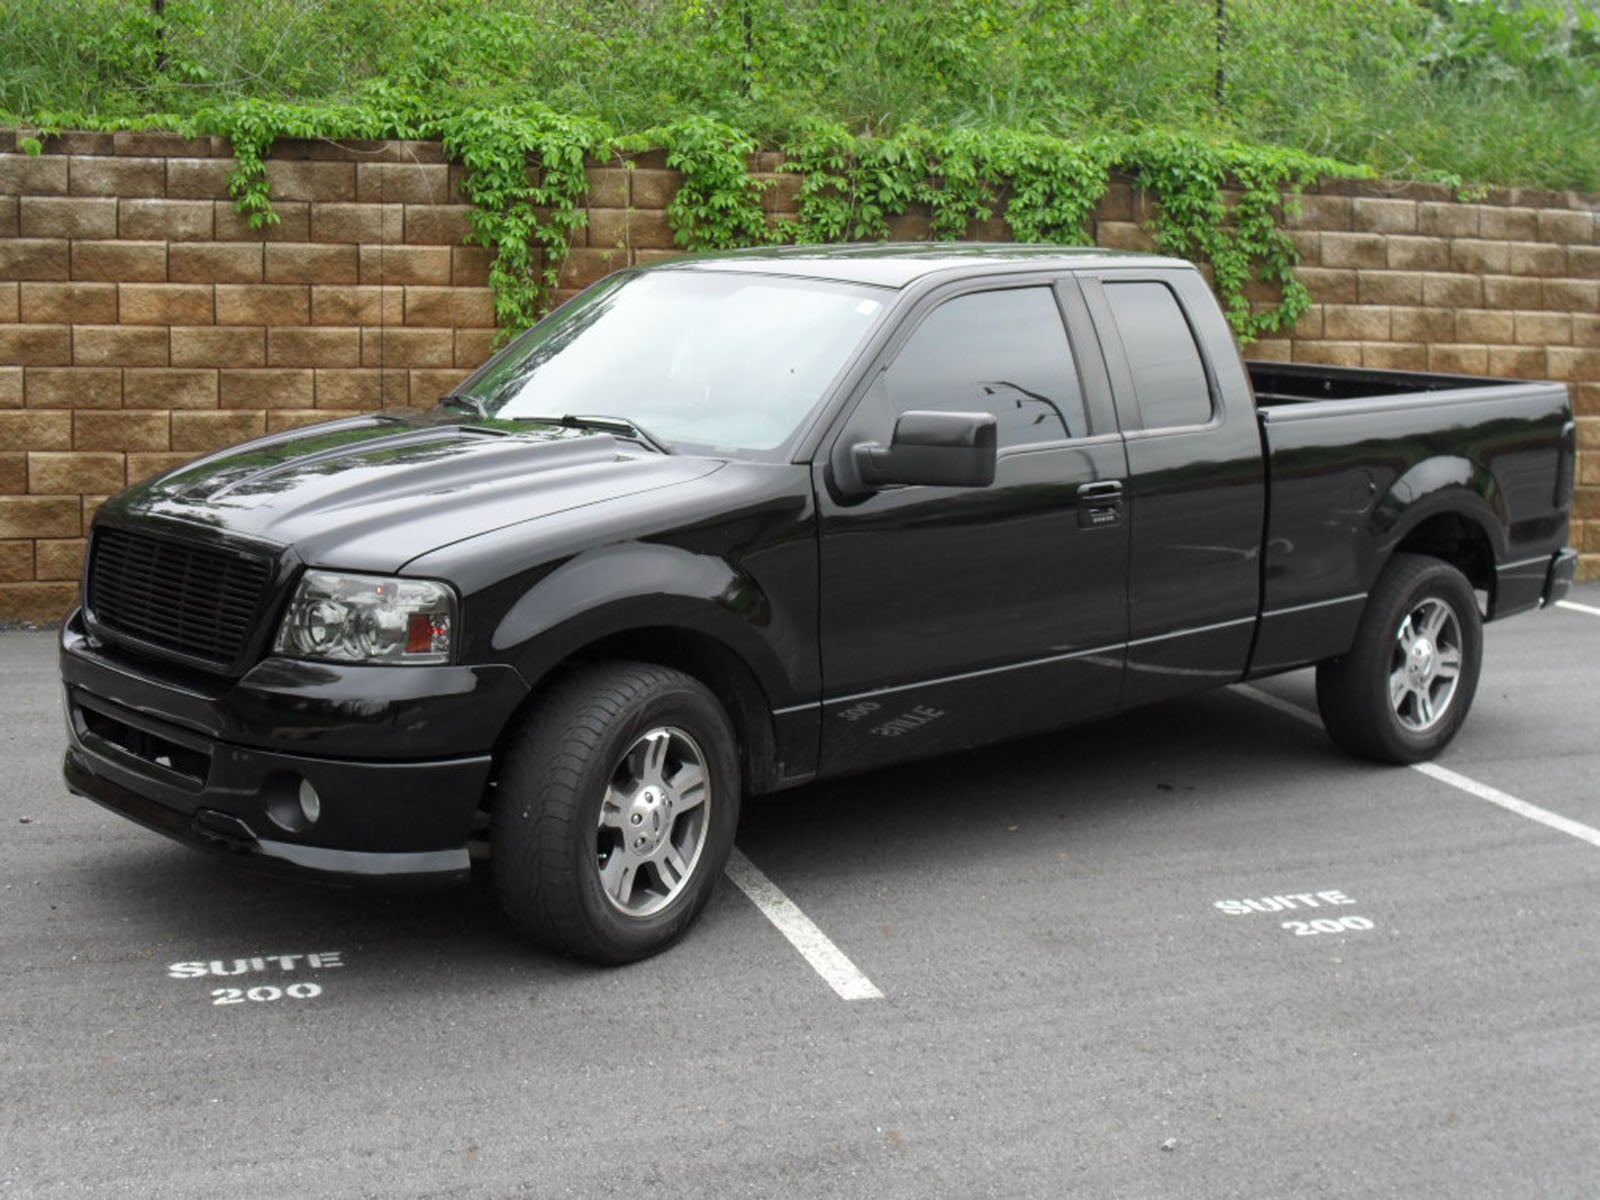 Ford f150 for sale in georgia #3